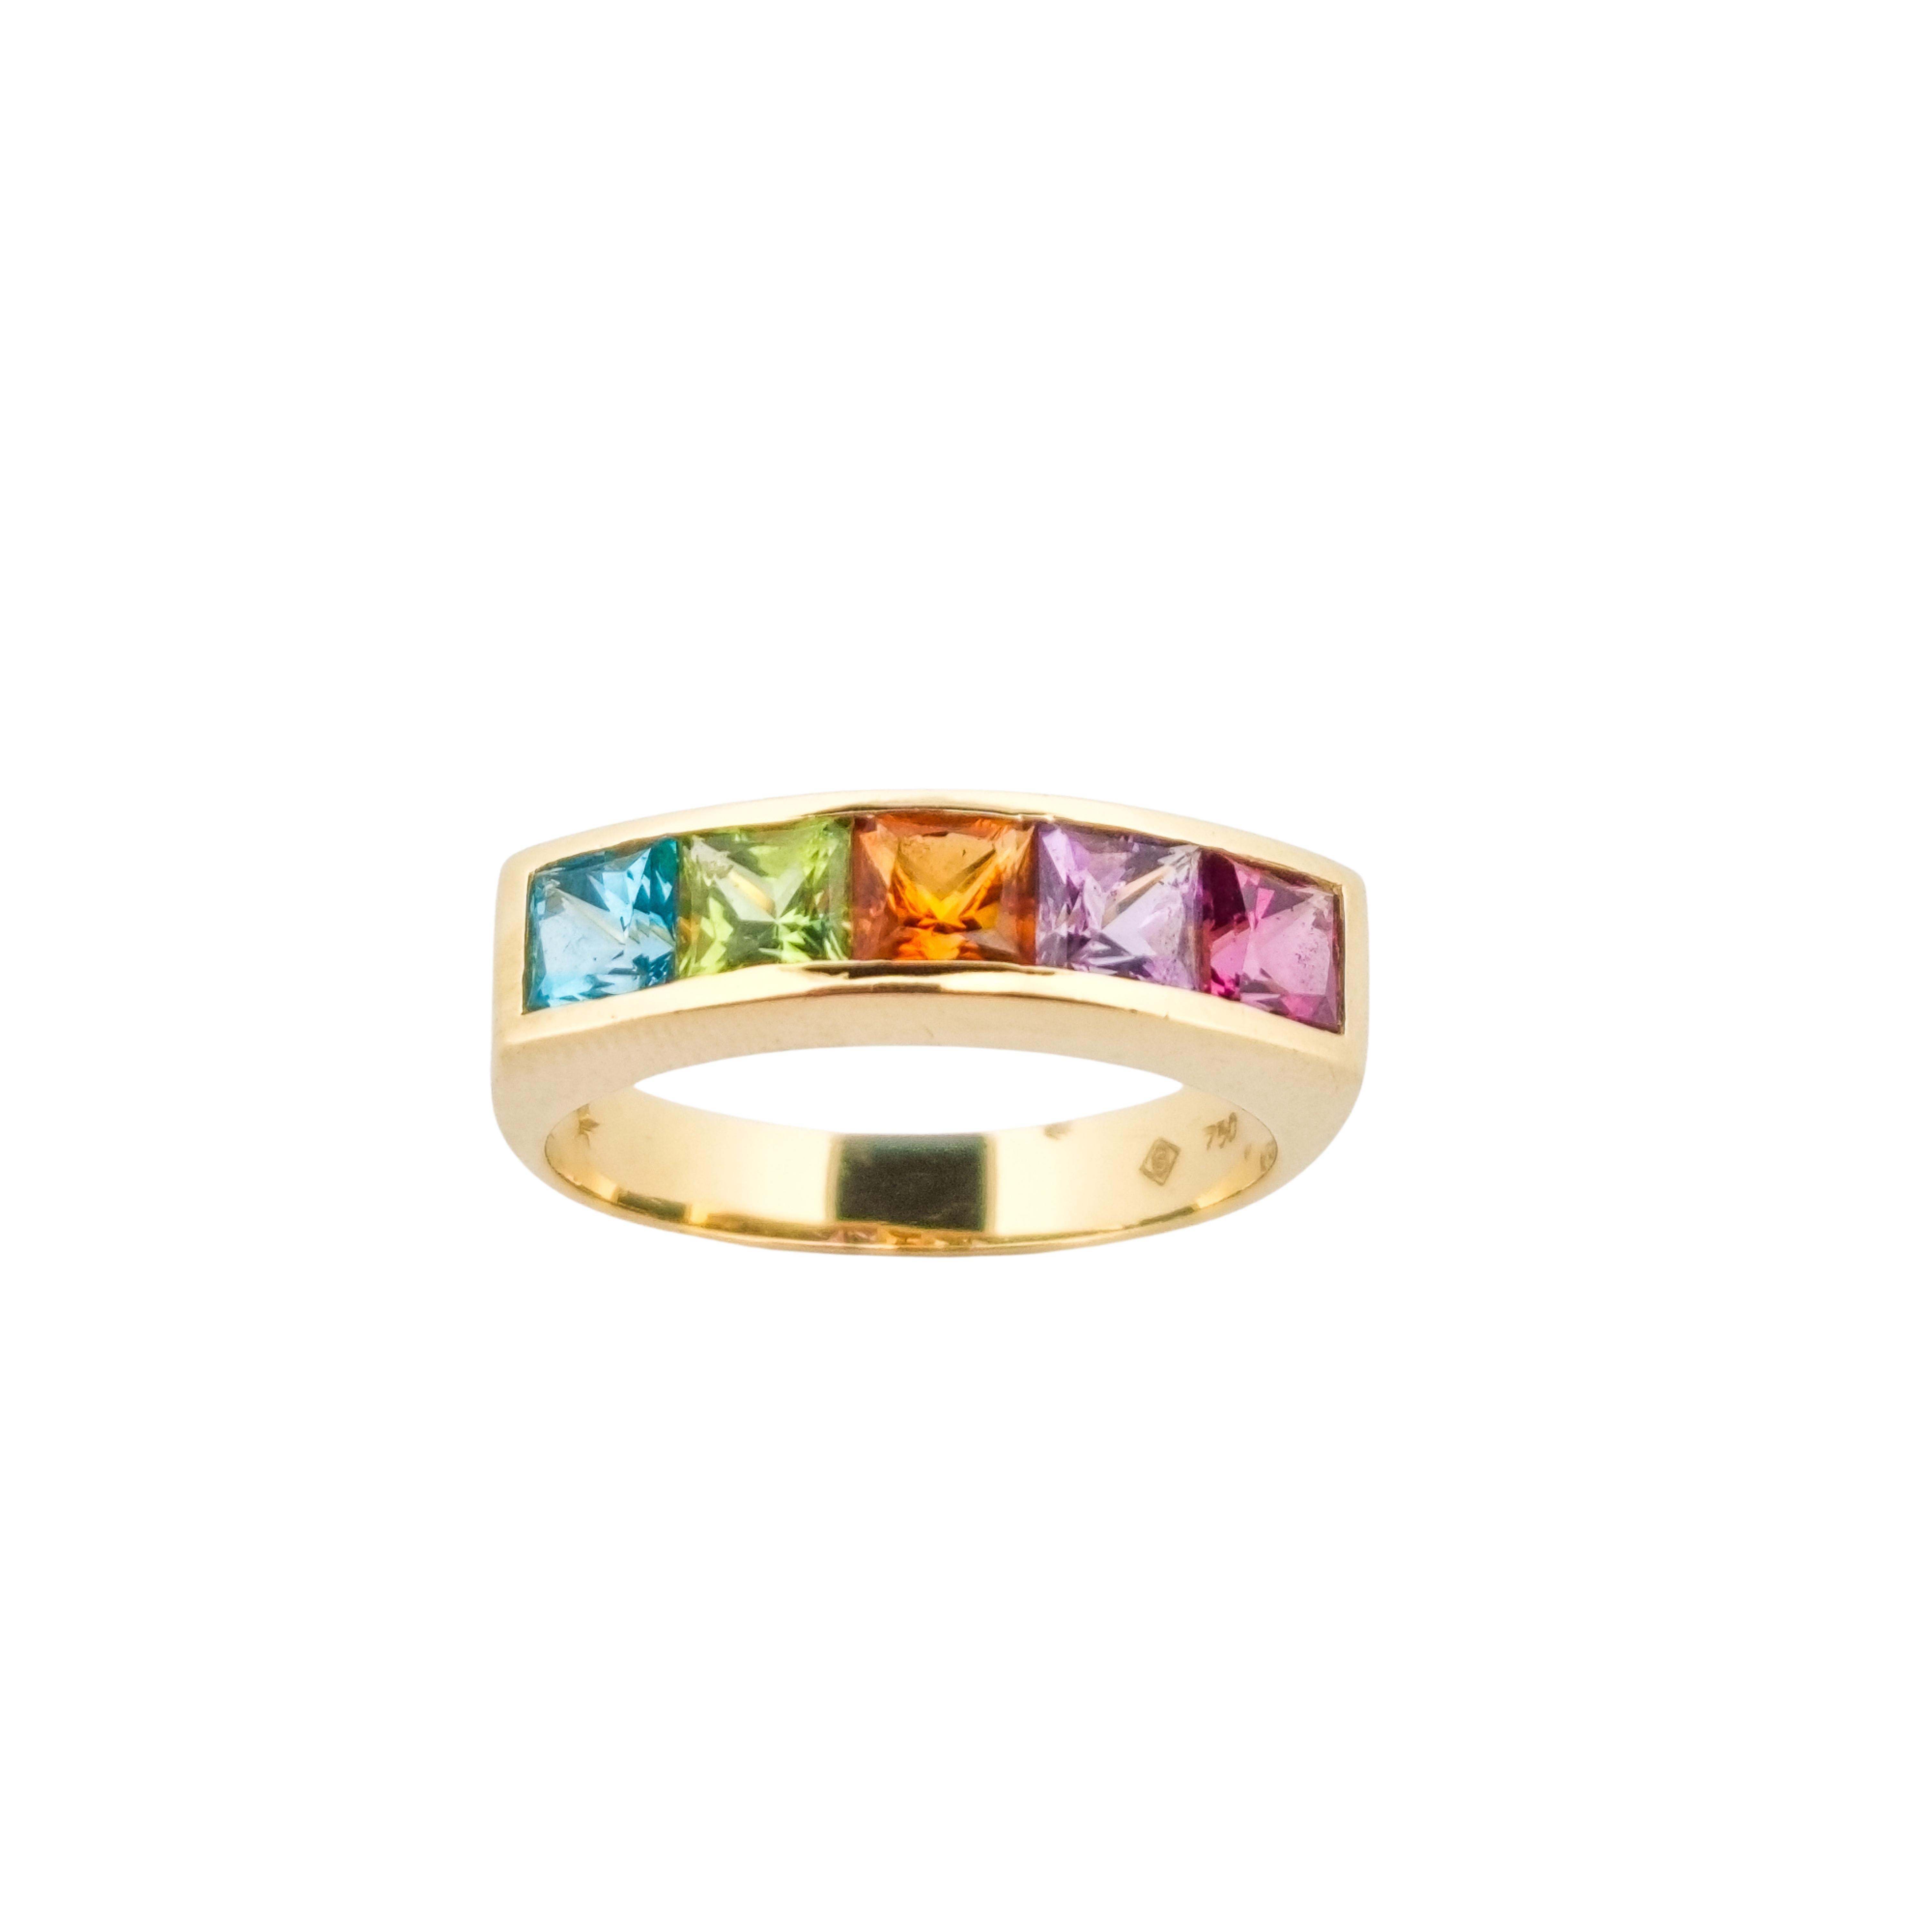 The H.Stern Rainbow Ring is a true statement piece, featuring a vibrant array of gemstones set in 18k yellow gold. With its bold and colorful design, this ring is the perfect accessory to add a touch of glamour to any outfit. Handcrafted with the